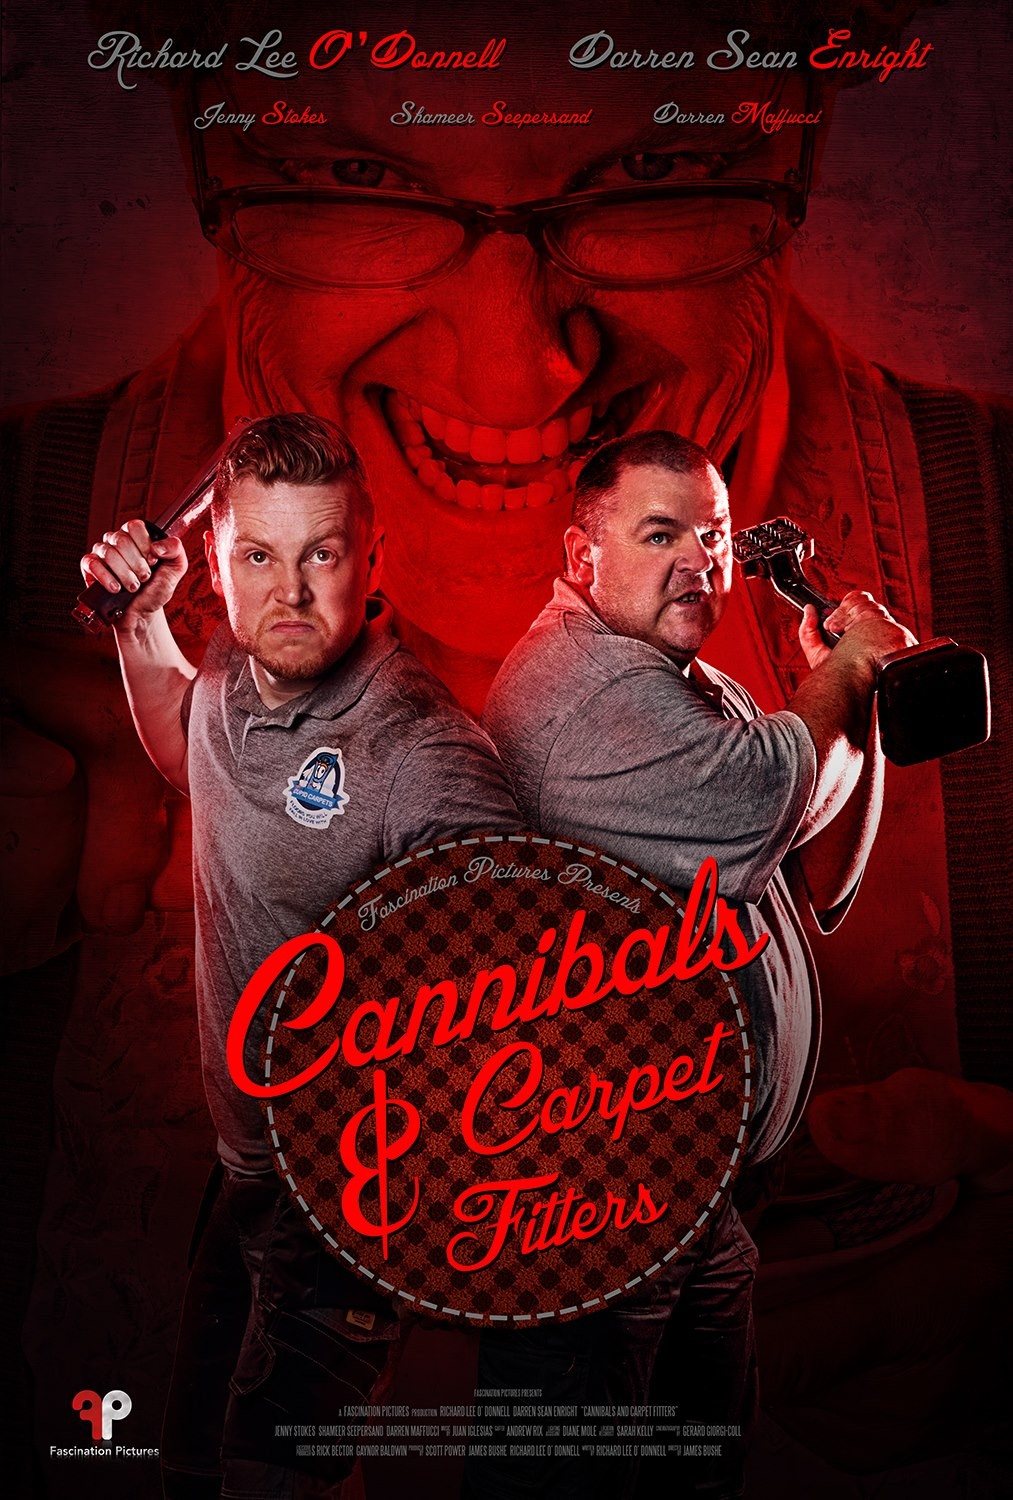 Extra Large Movie Poster Image for Cannibals & Carpet Fitters